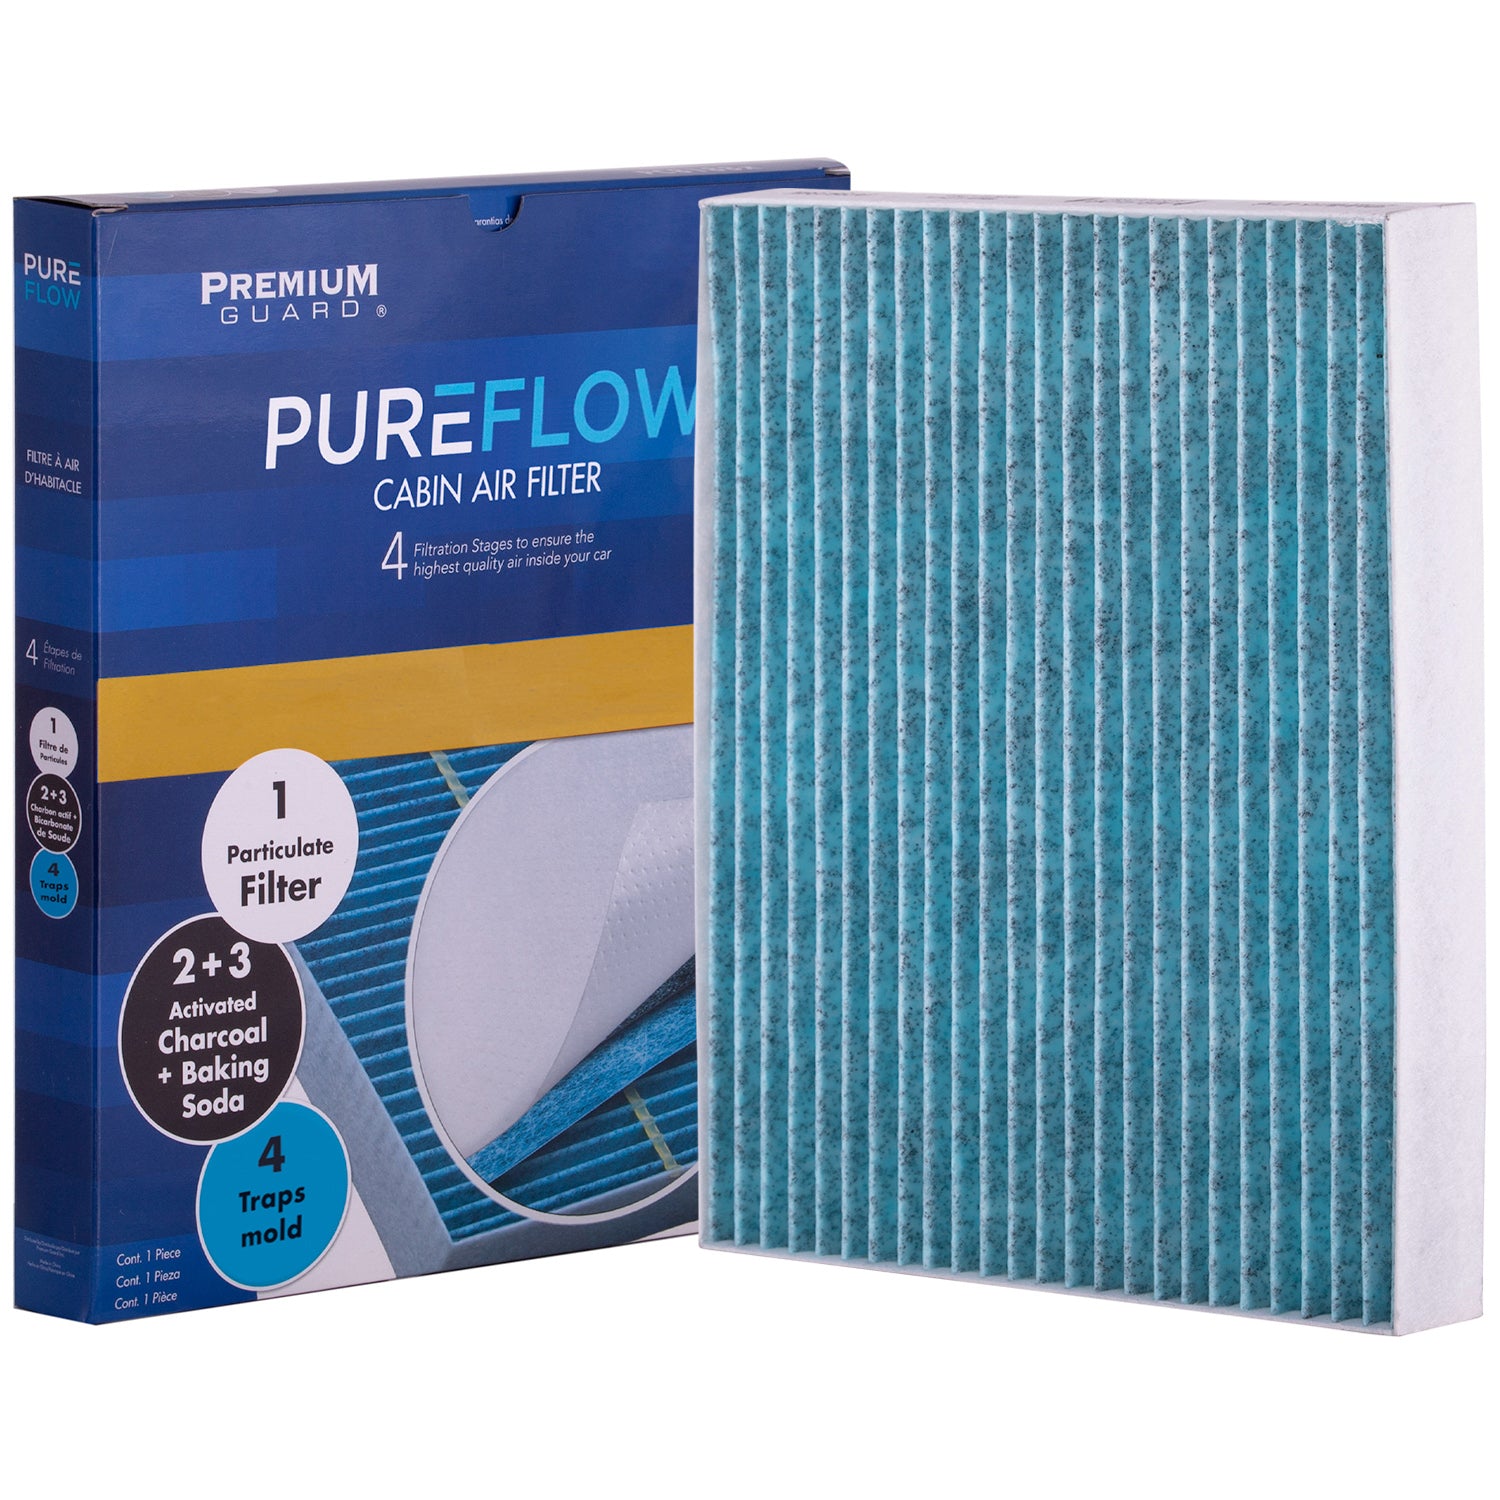 PUREFLOW 2022 Kia Rio Cabin Air Filter with Antibacterial Technology, PC99239X